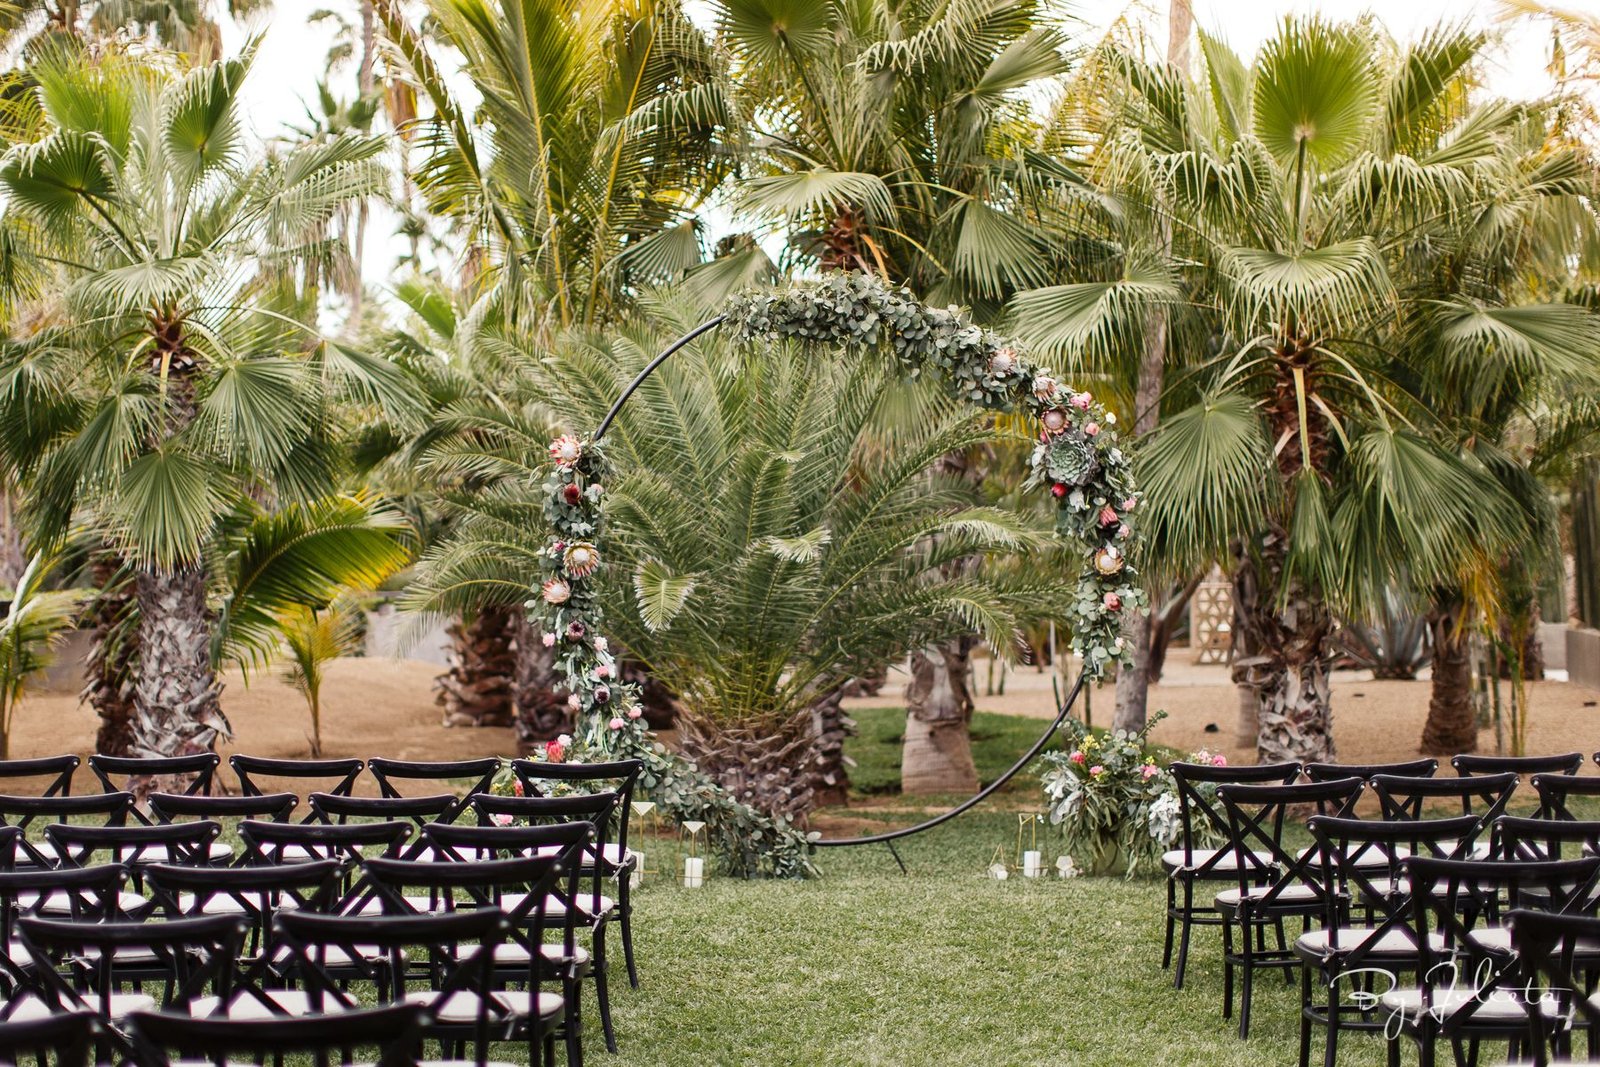 Ceremony Design by Jesse Wolff at Acre Baja by Cabo Wedding Services